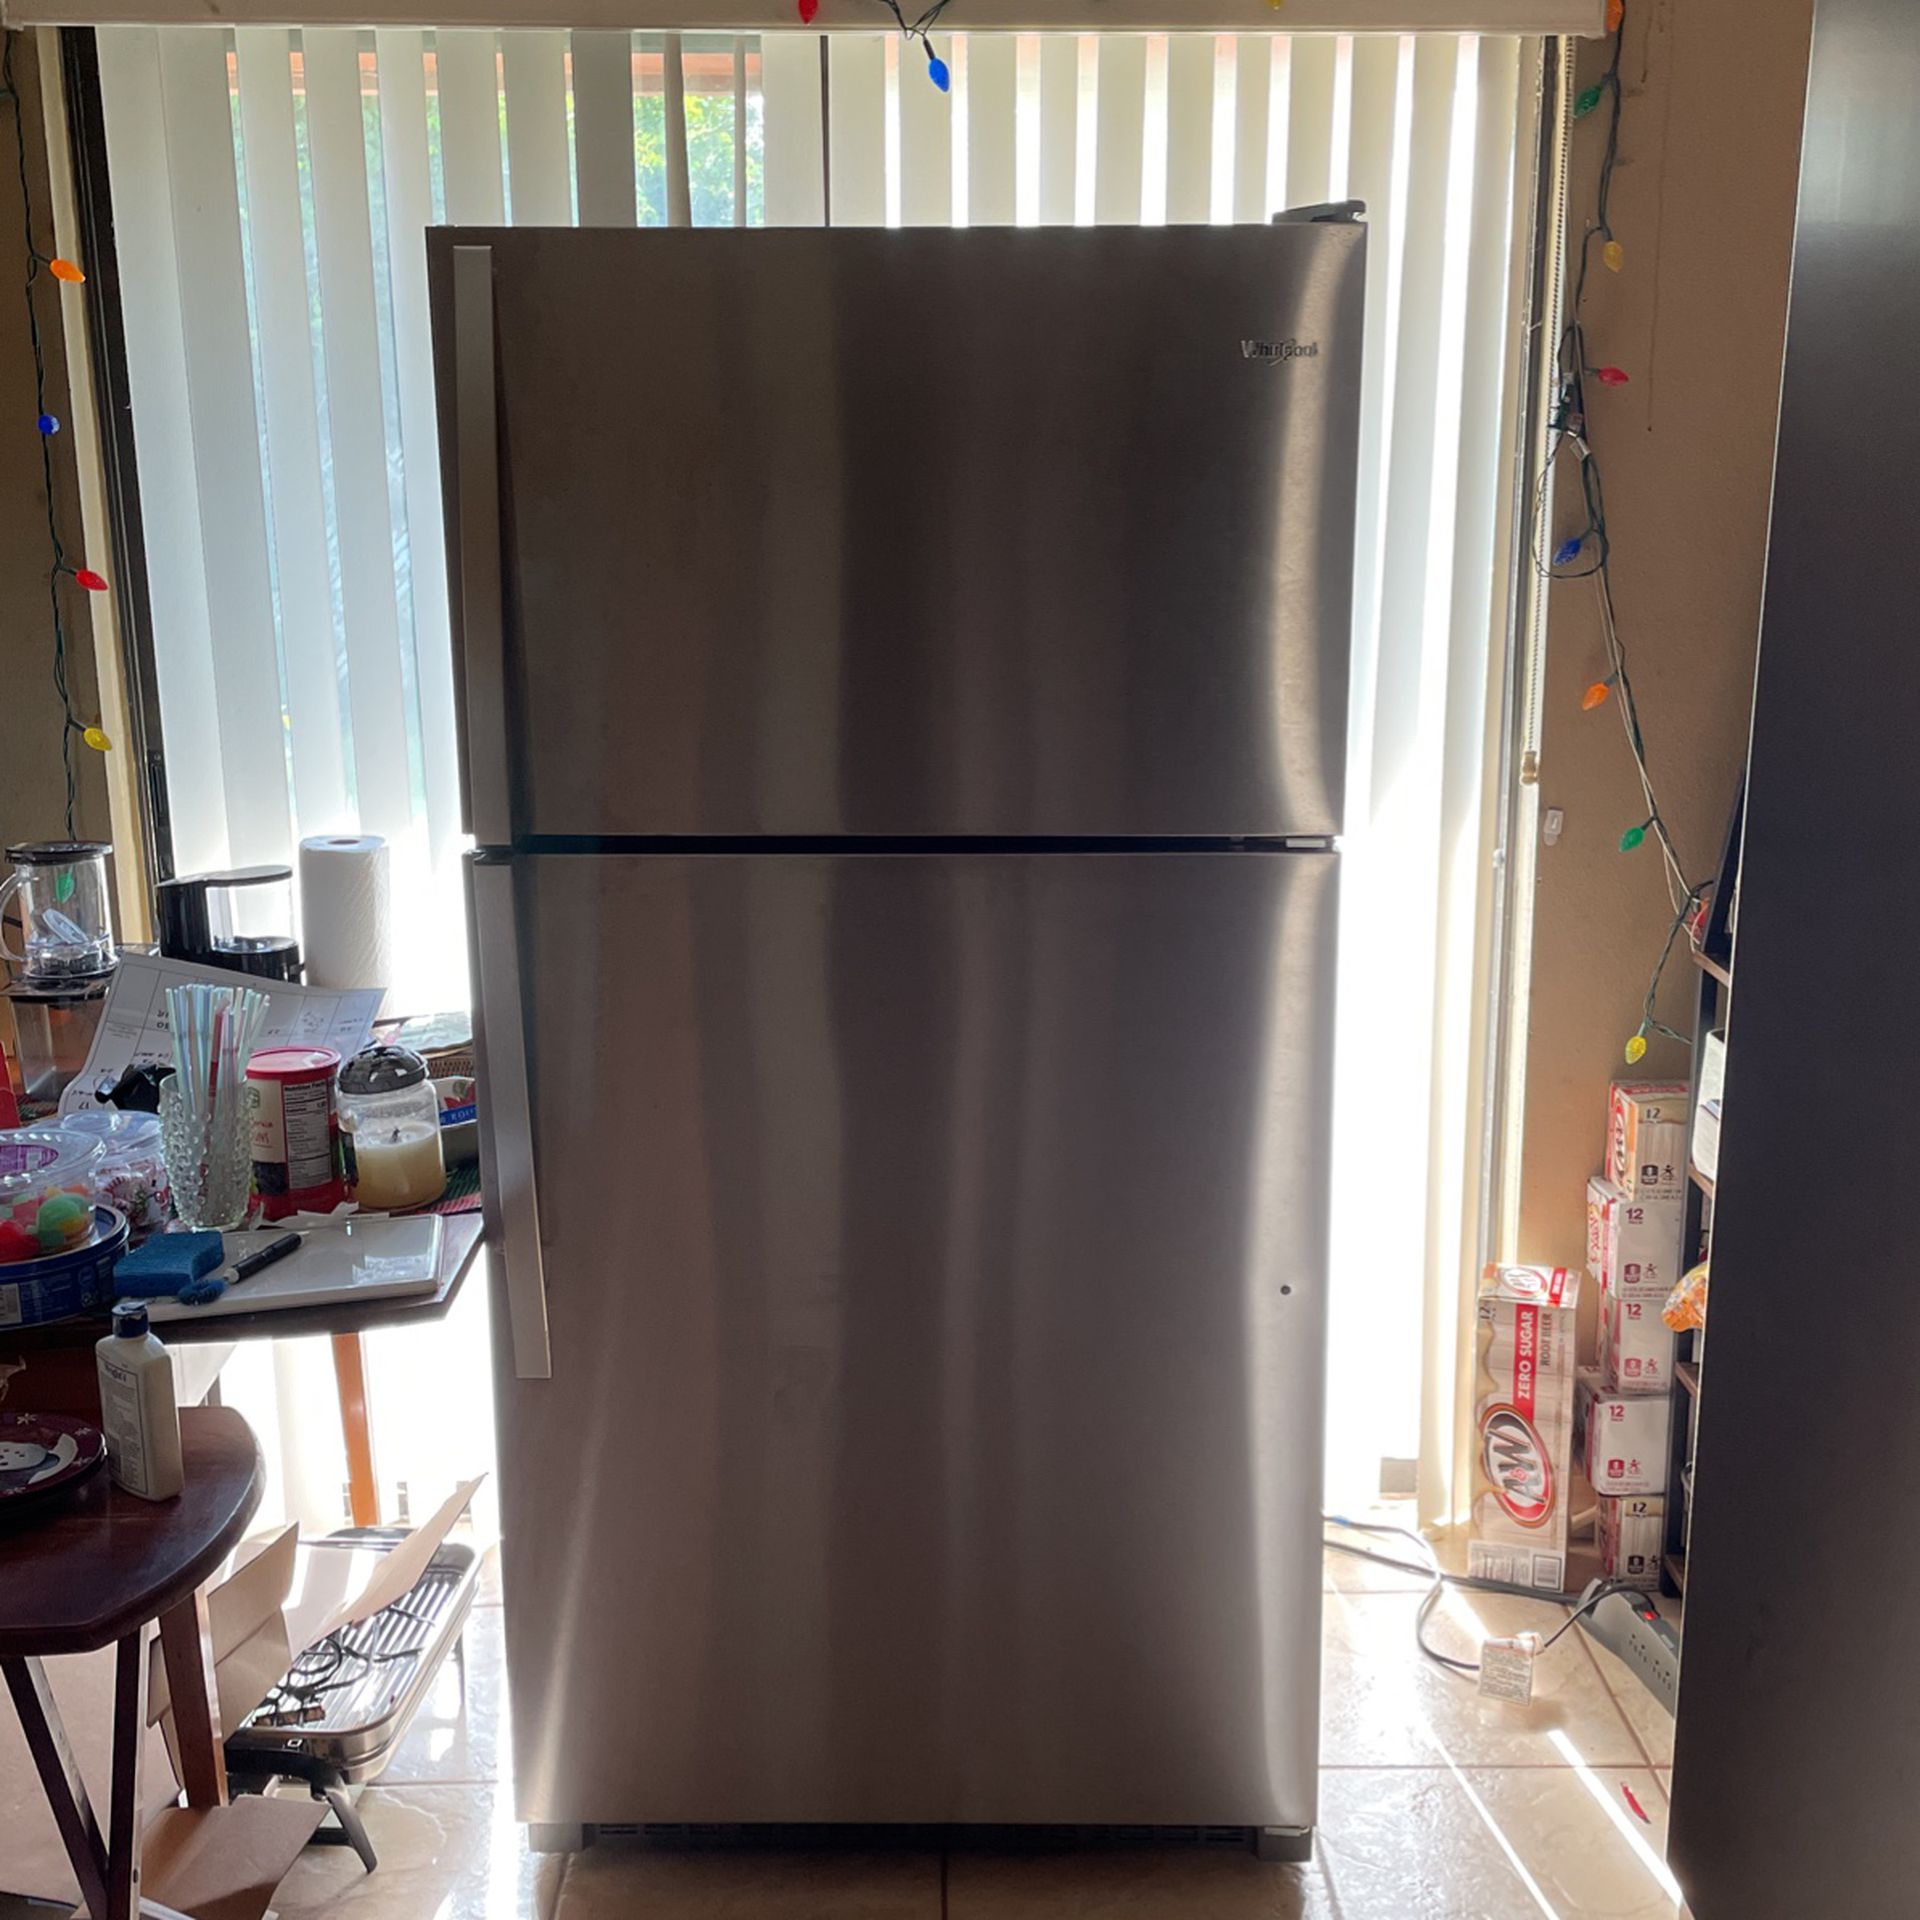 Whirlpool 20 Cubic Foot Refrigerator 4 Years Old 